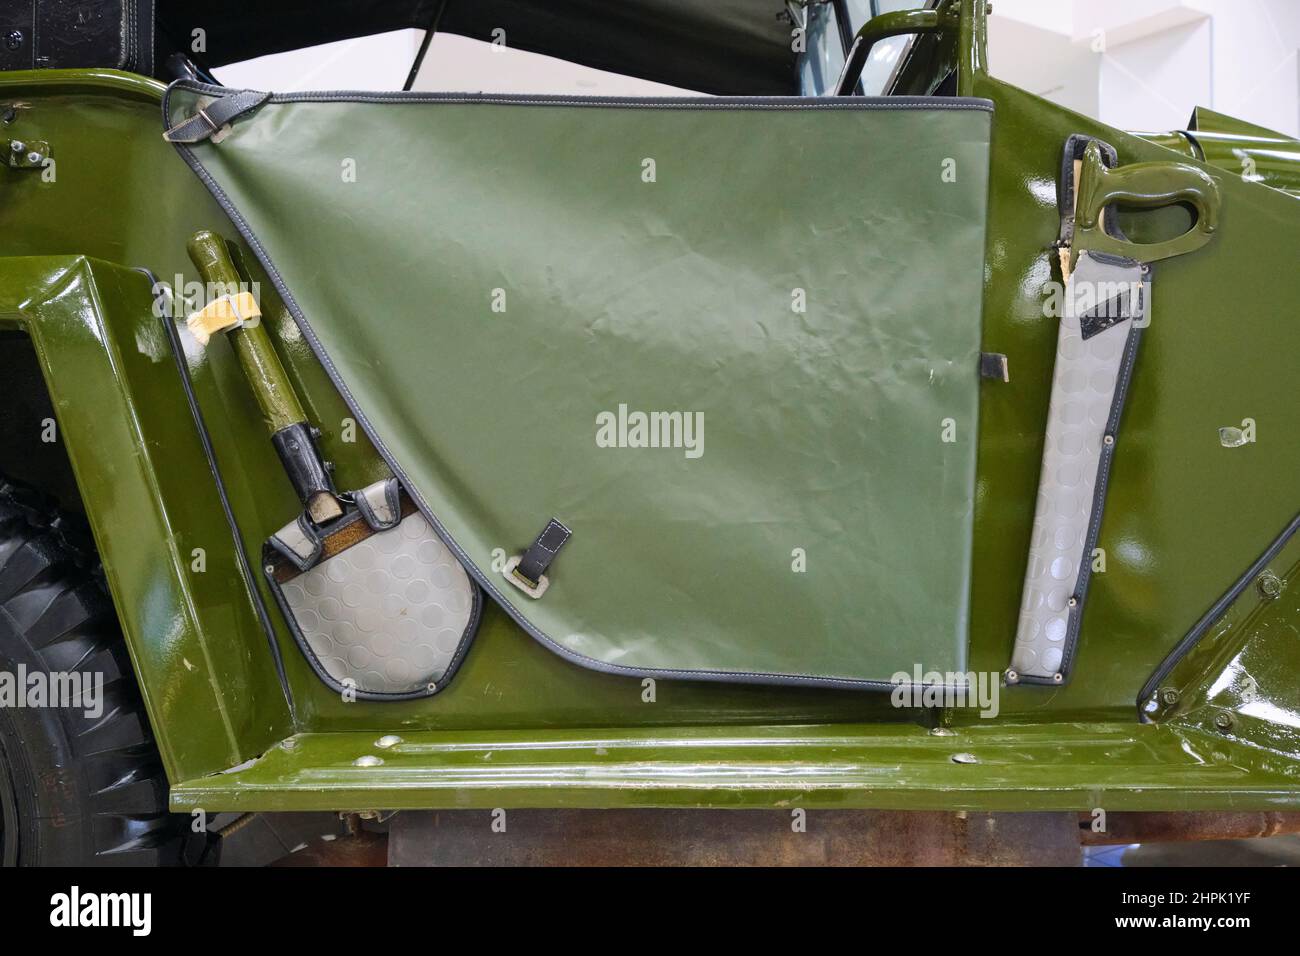 A shovel and saw mounted by the soft door of a Gaz-67 green military small jeep transport car, vehicle. At the Polytechnical, Polytexnika Transportati Stock Photo